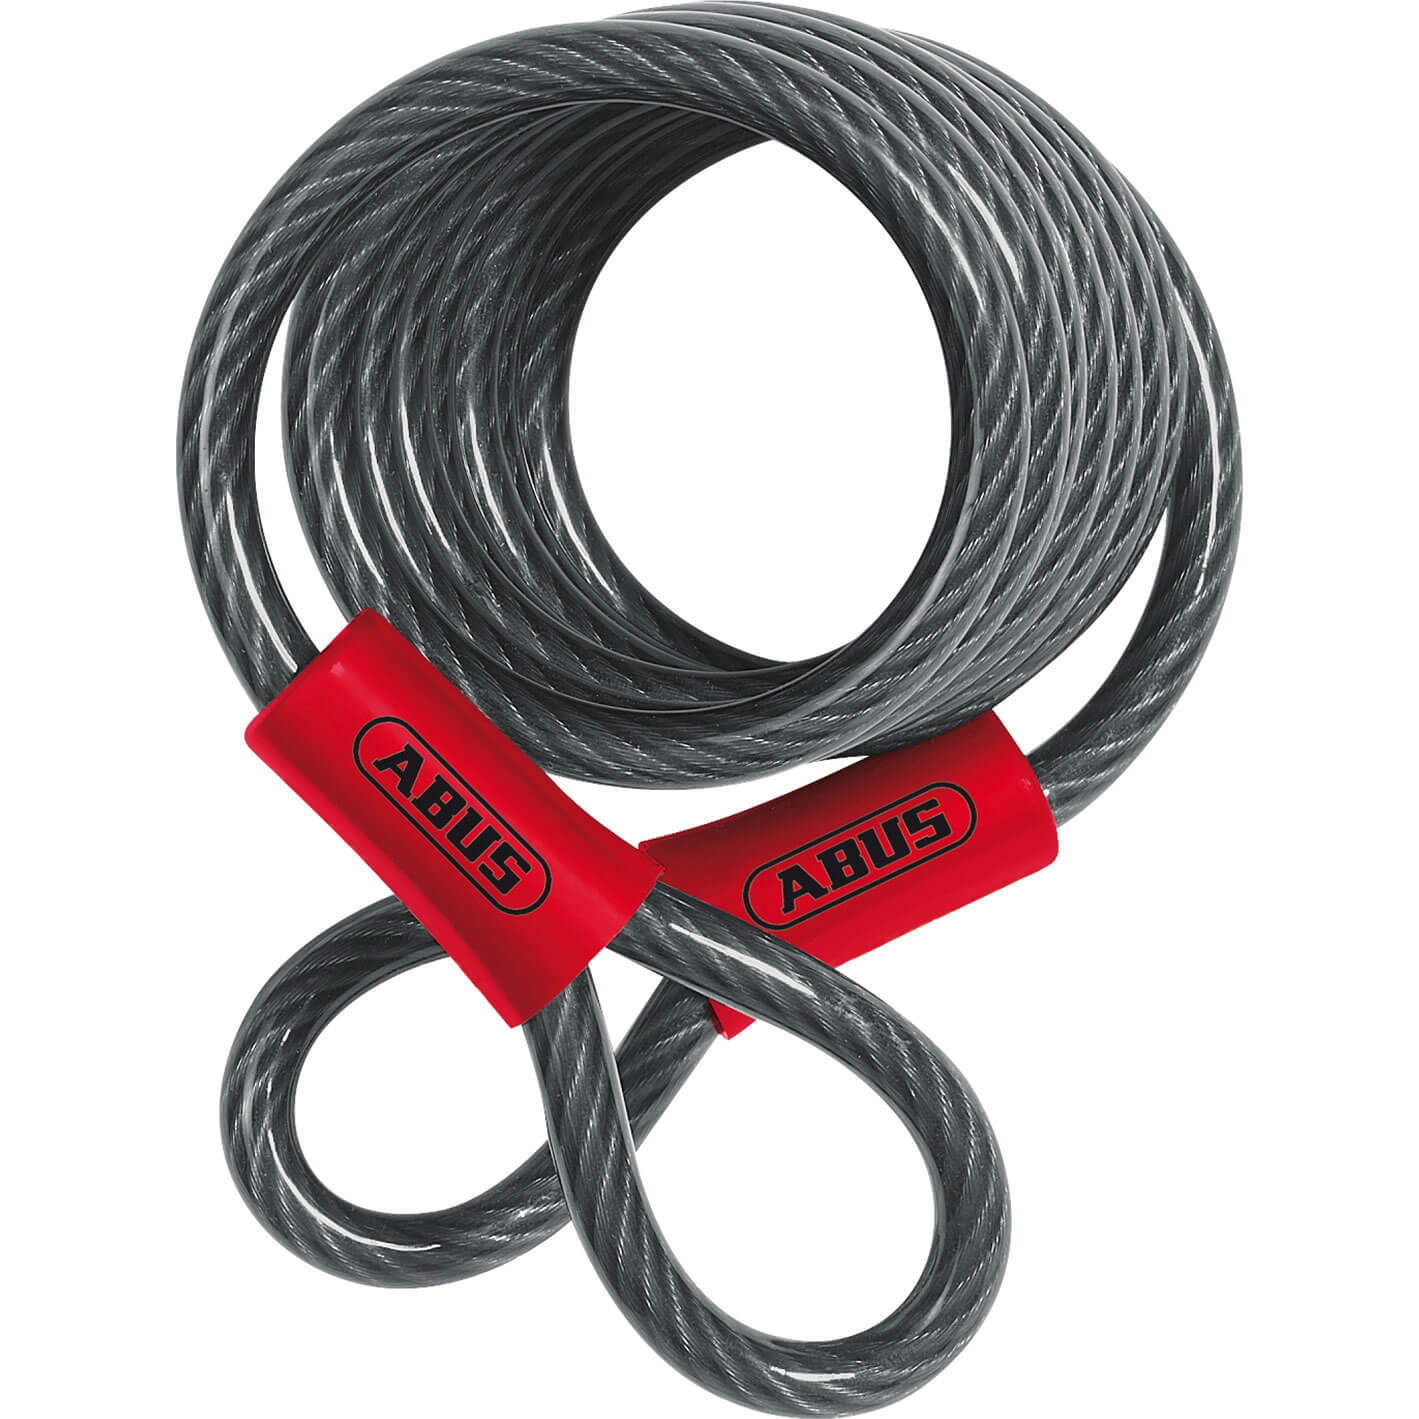 Photo of Abus Cobra Security Cable 8mm 1.85m